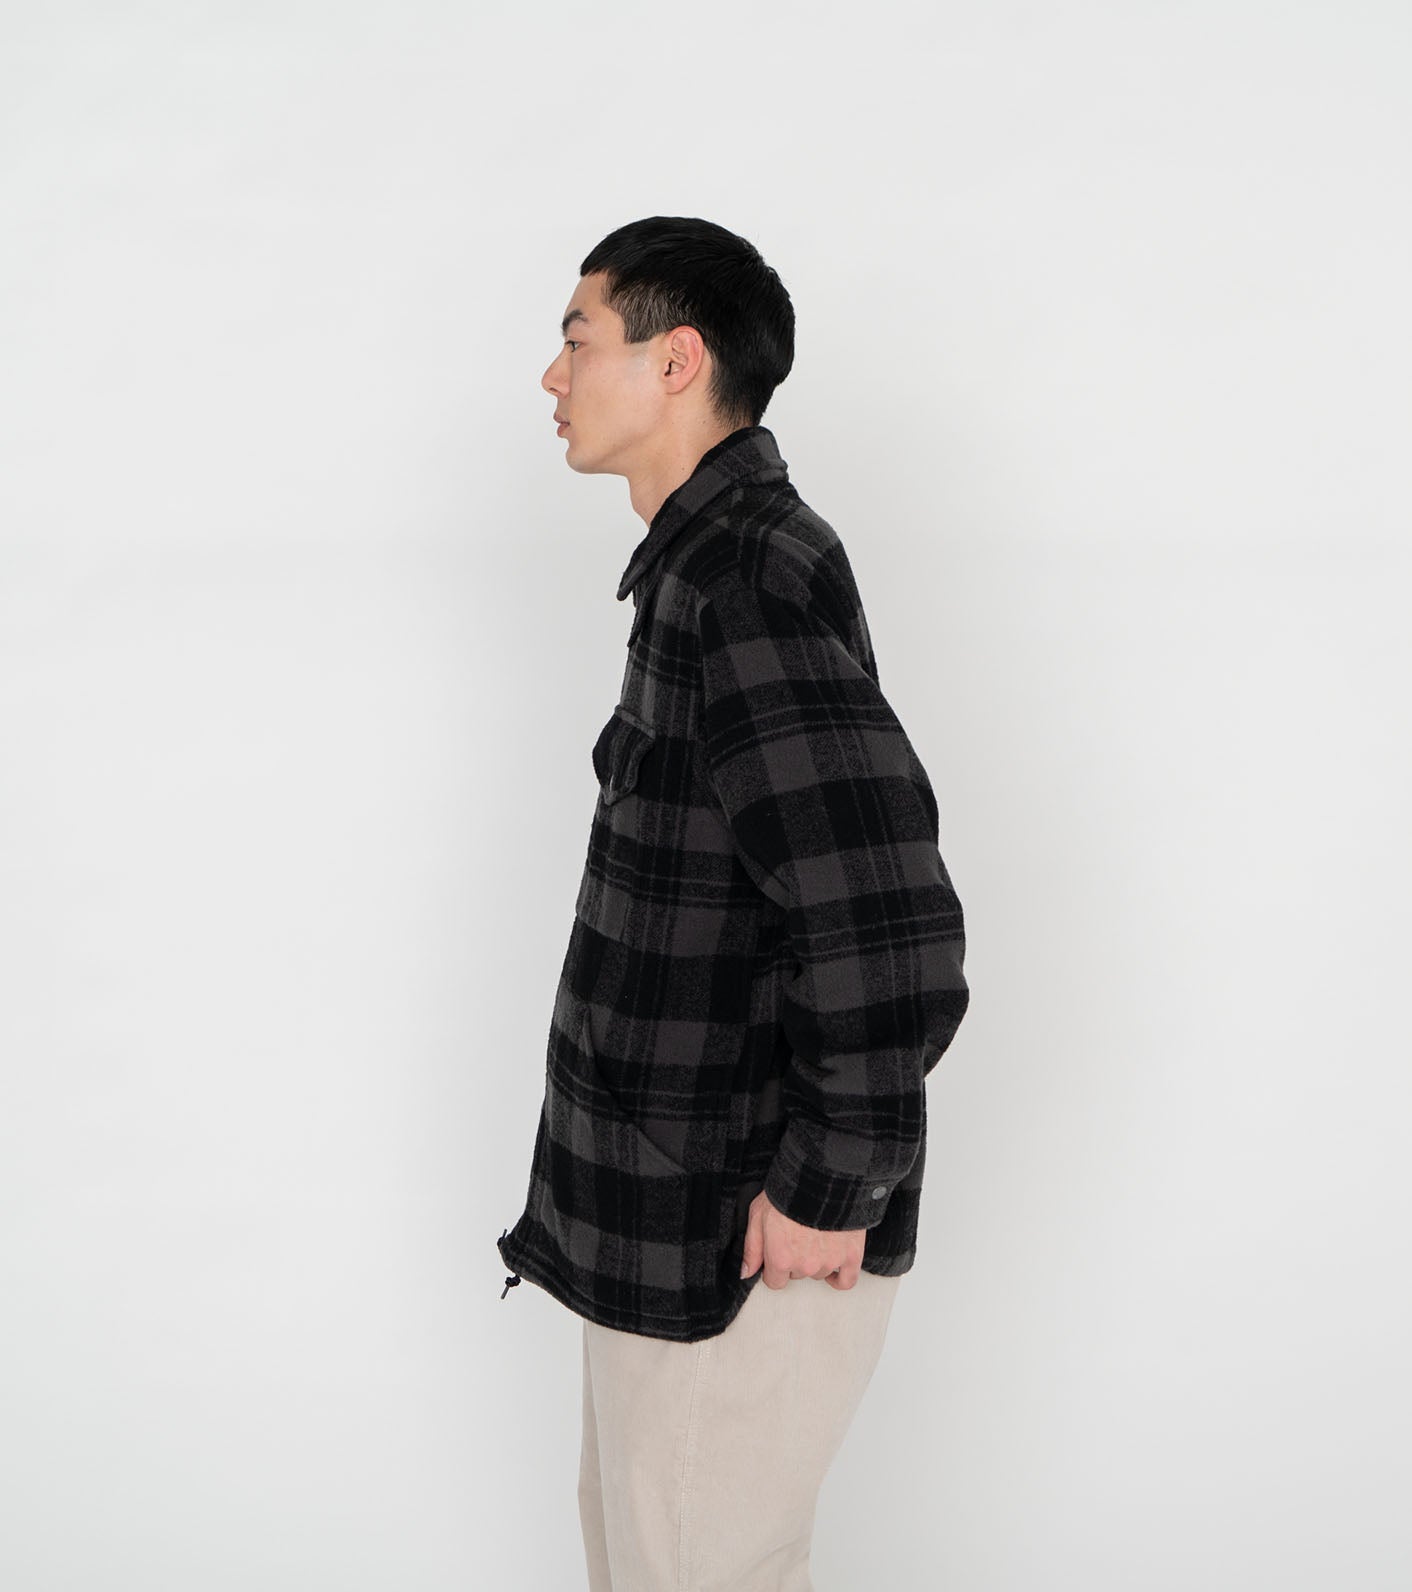 THE NORTH FACE PURPLE LABEL Wool Field CPO Jacket